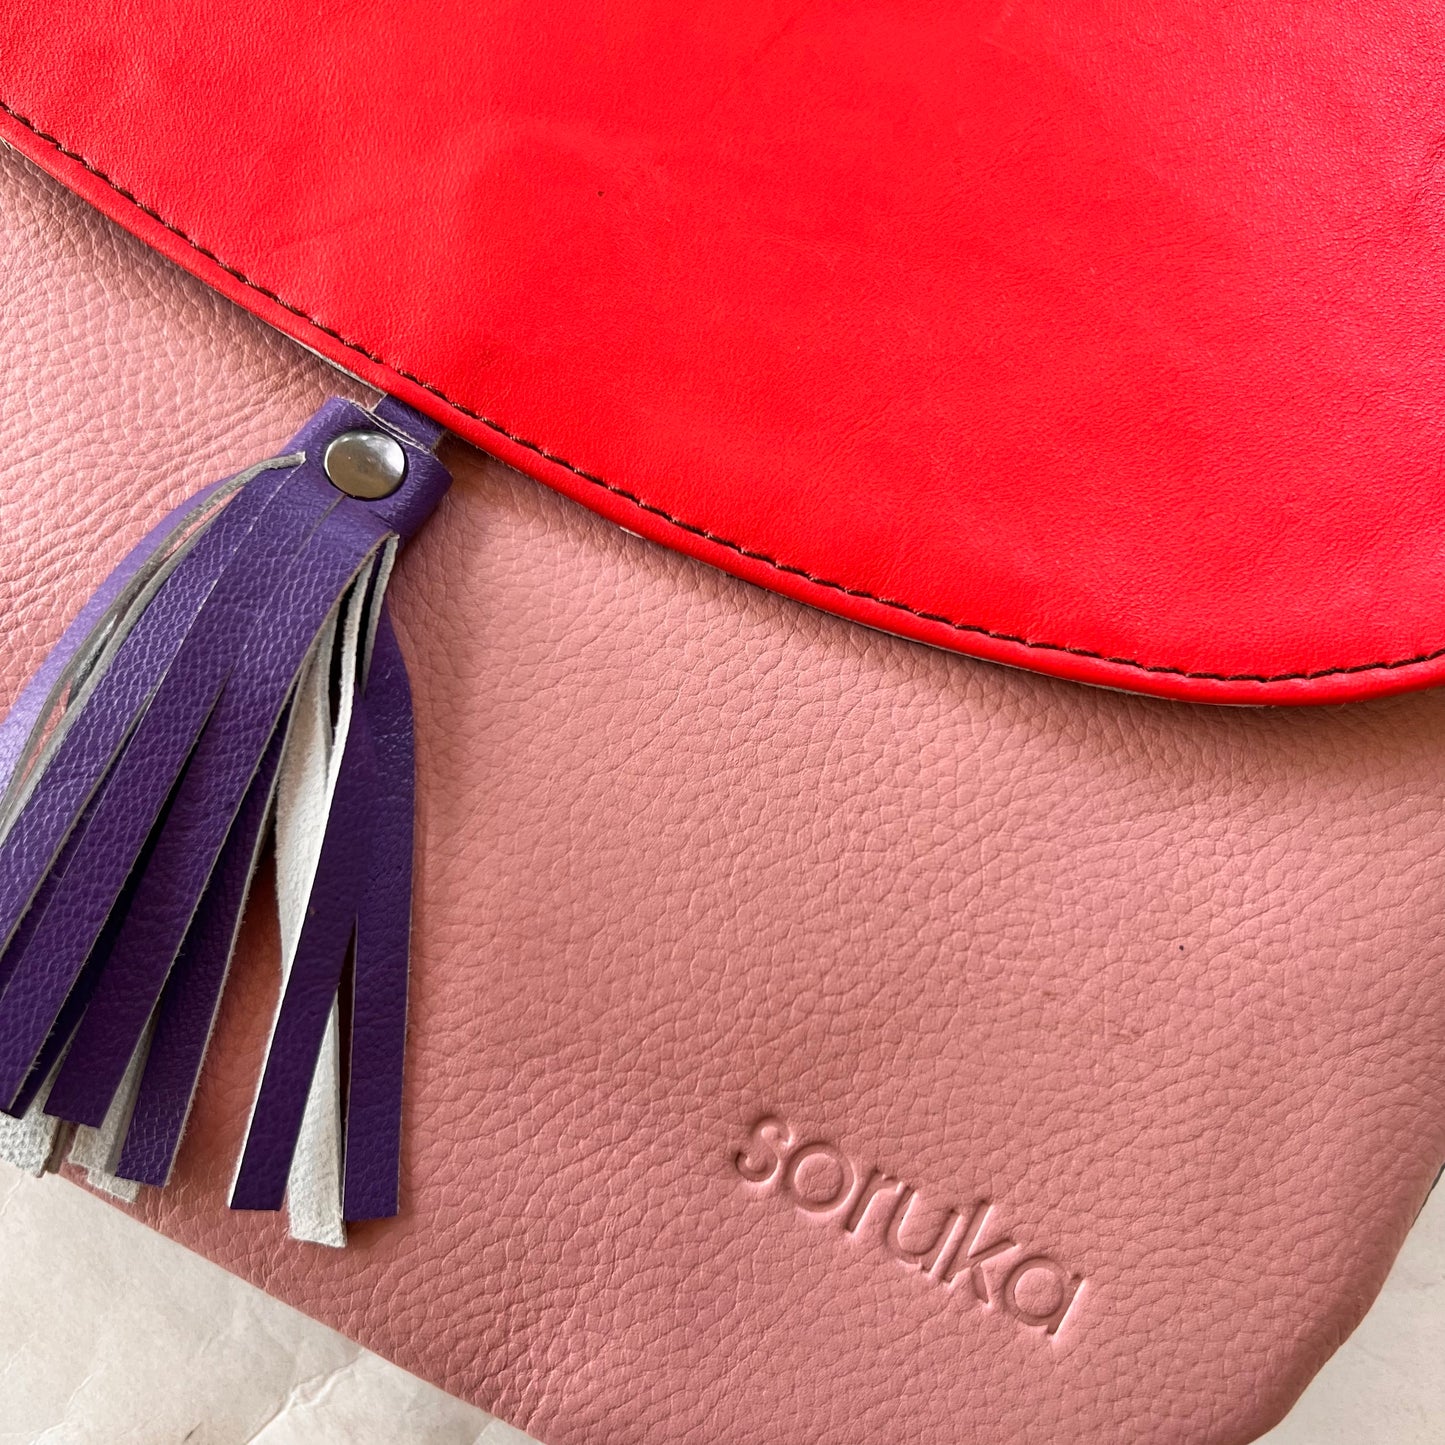 close-up of lola bag with bright red flap with purple tassel over a pink body.